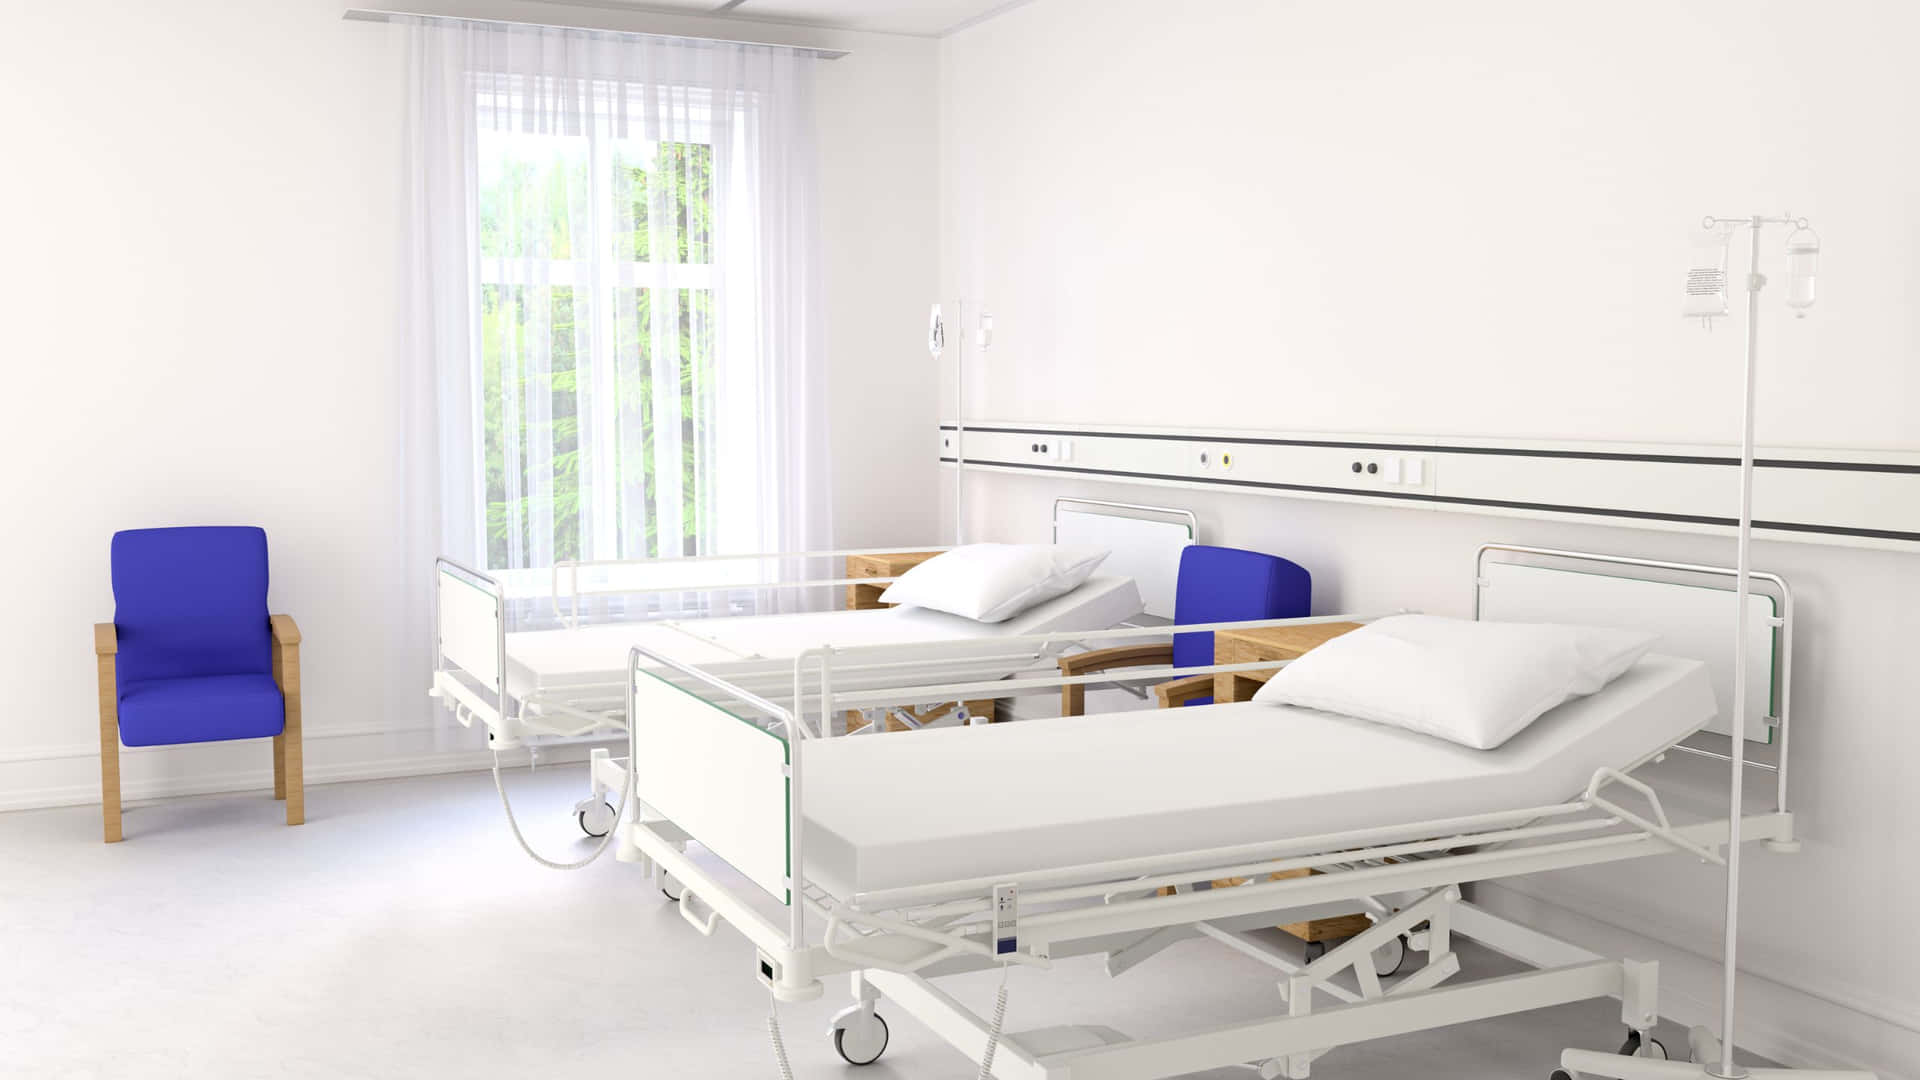 A Hospital Room With Two Beds And Chairs